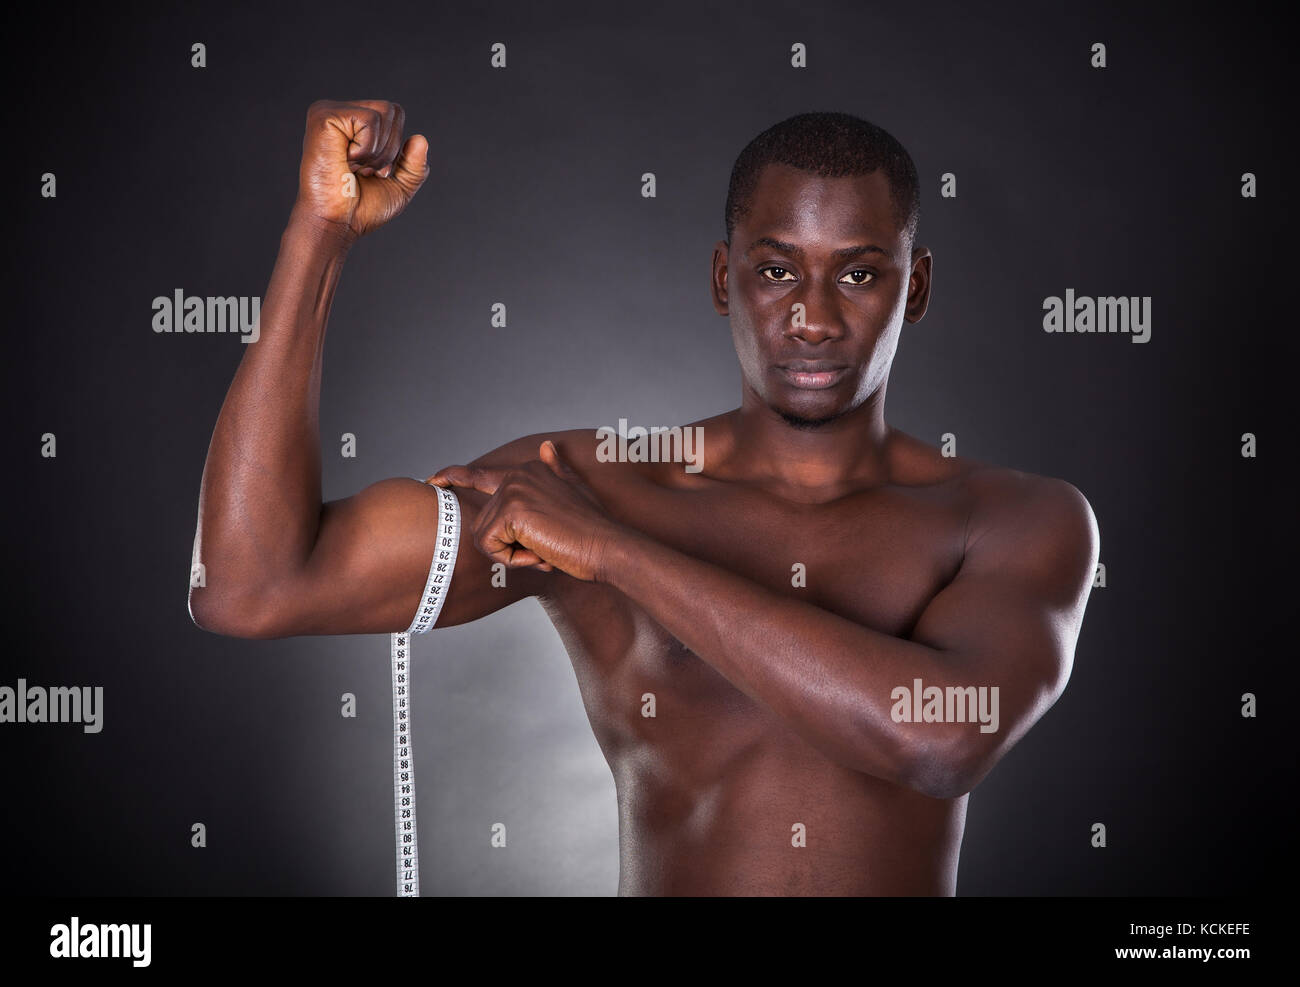 Man Measuring His Biceps With Measuring Tape On White Background Stock  Photo - Alamy